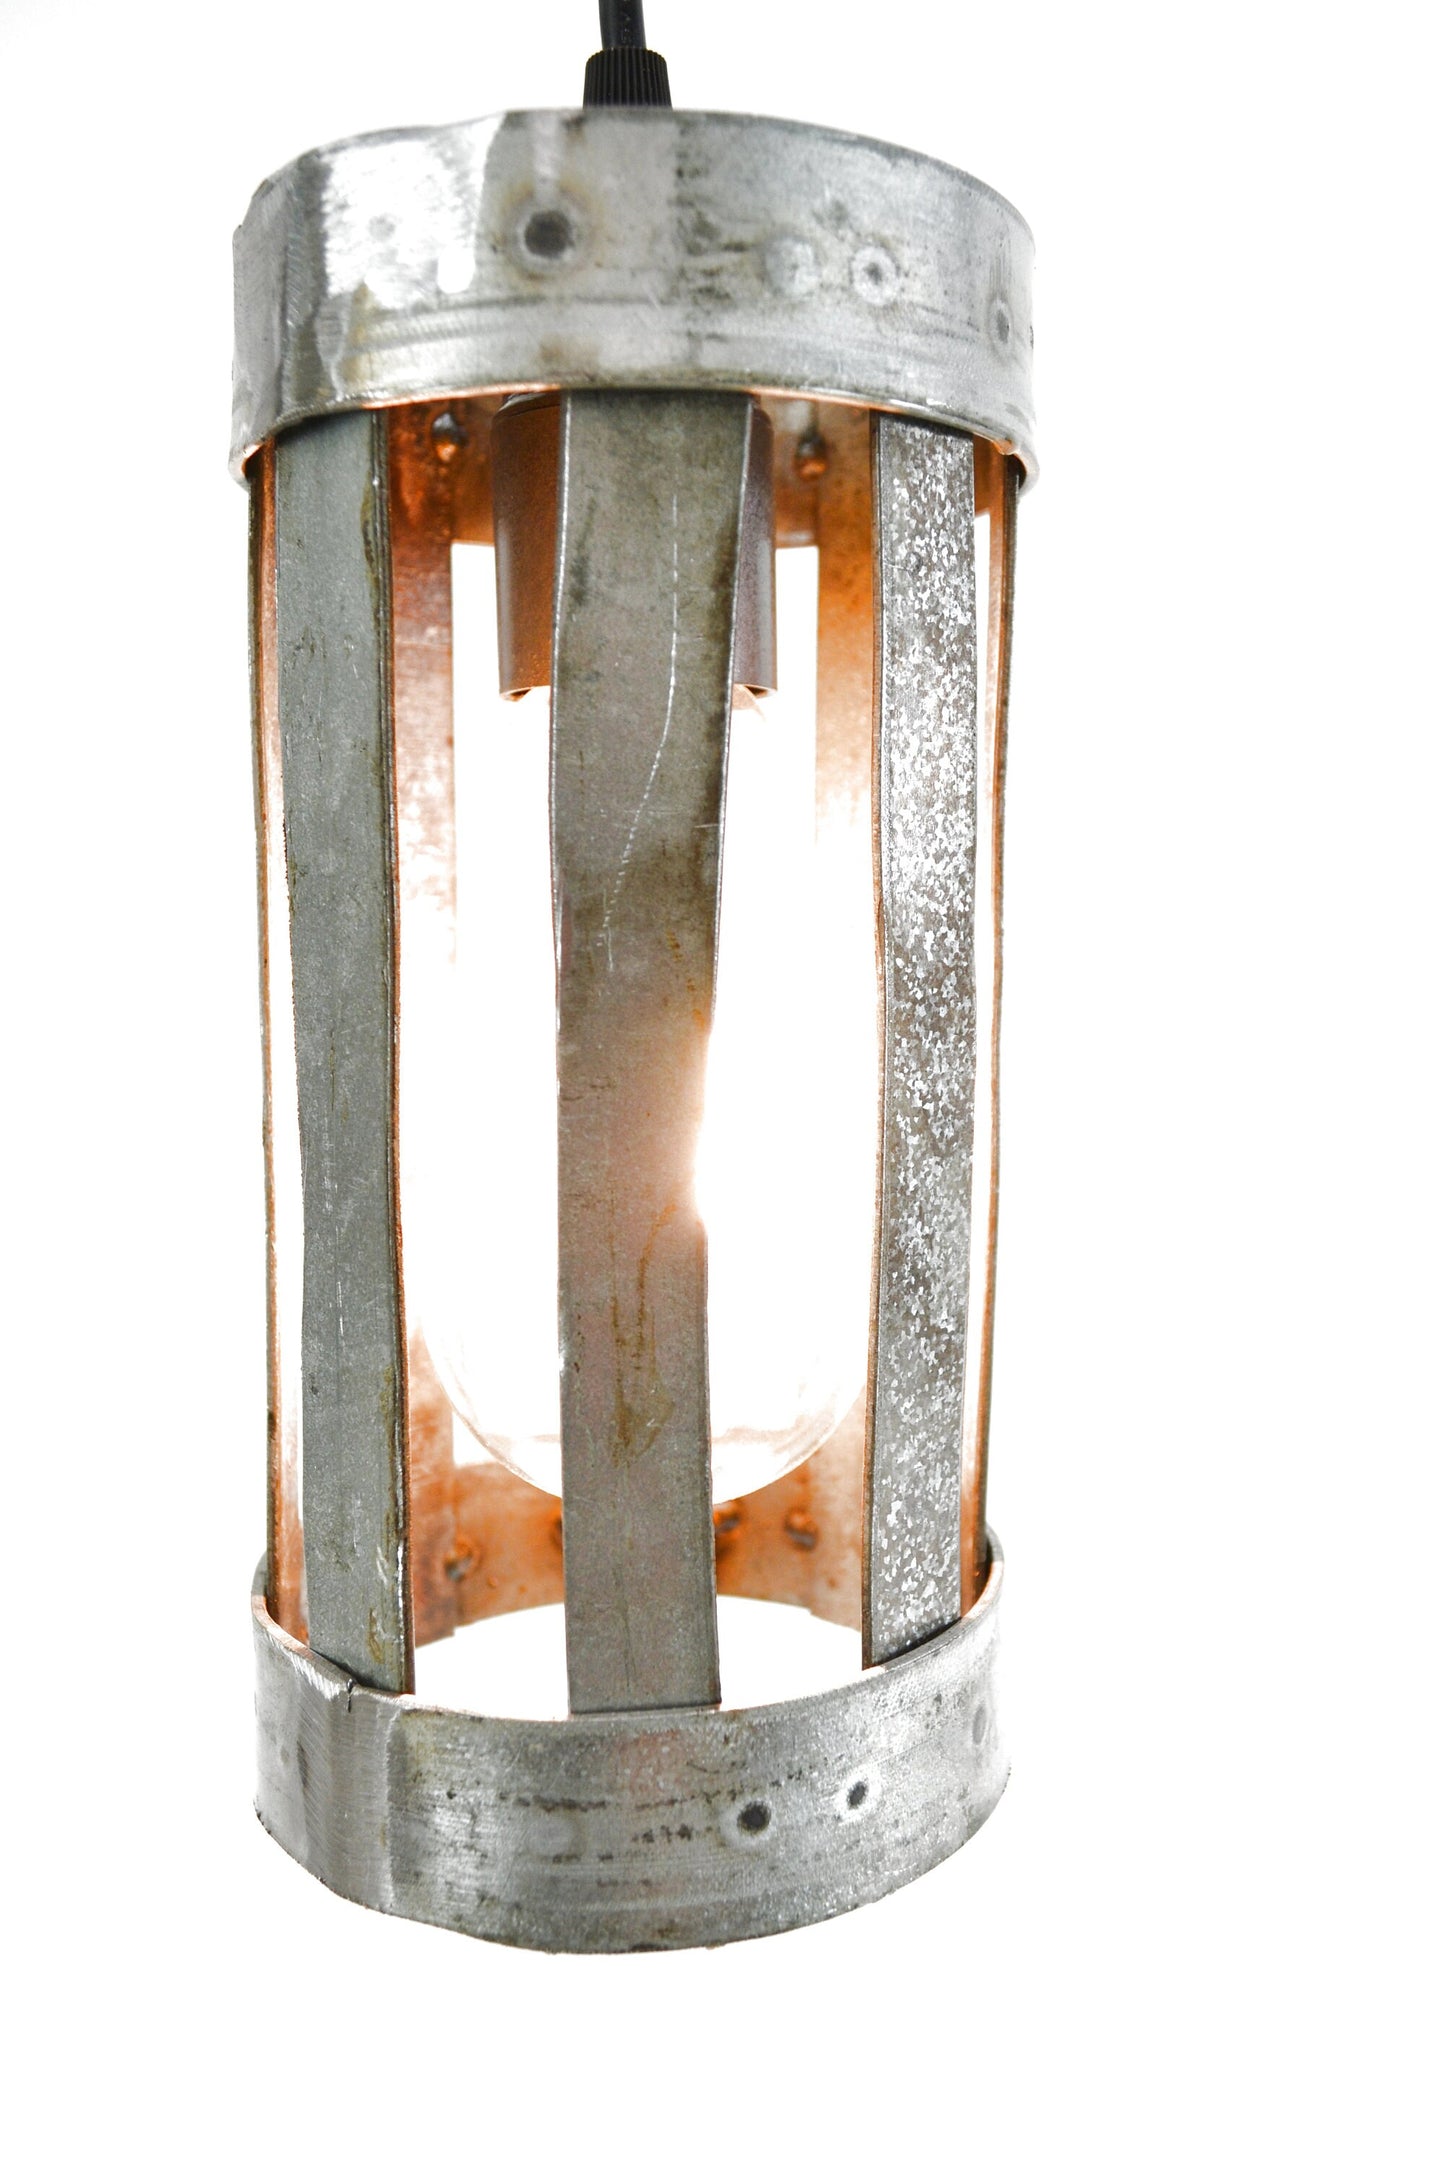 Wine Barrel Ring Pendant Light - Mini Valec - Made from retired CA wine barrel rings. 100% Recycled!